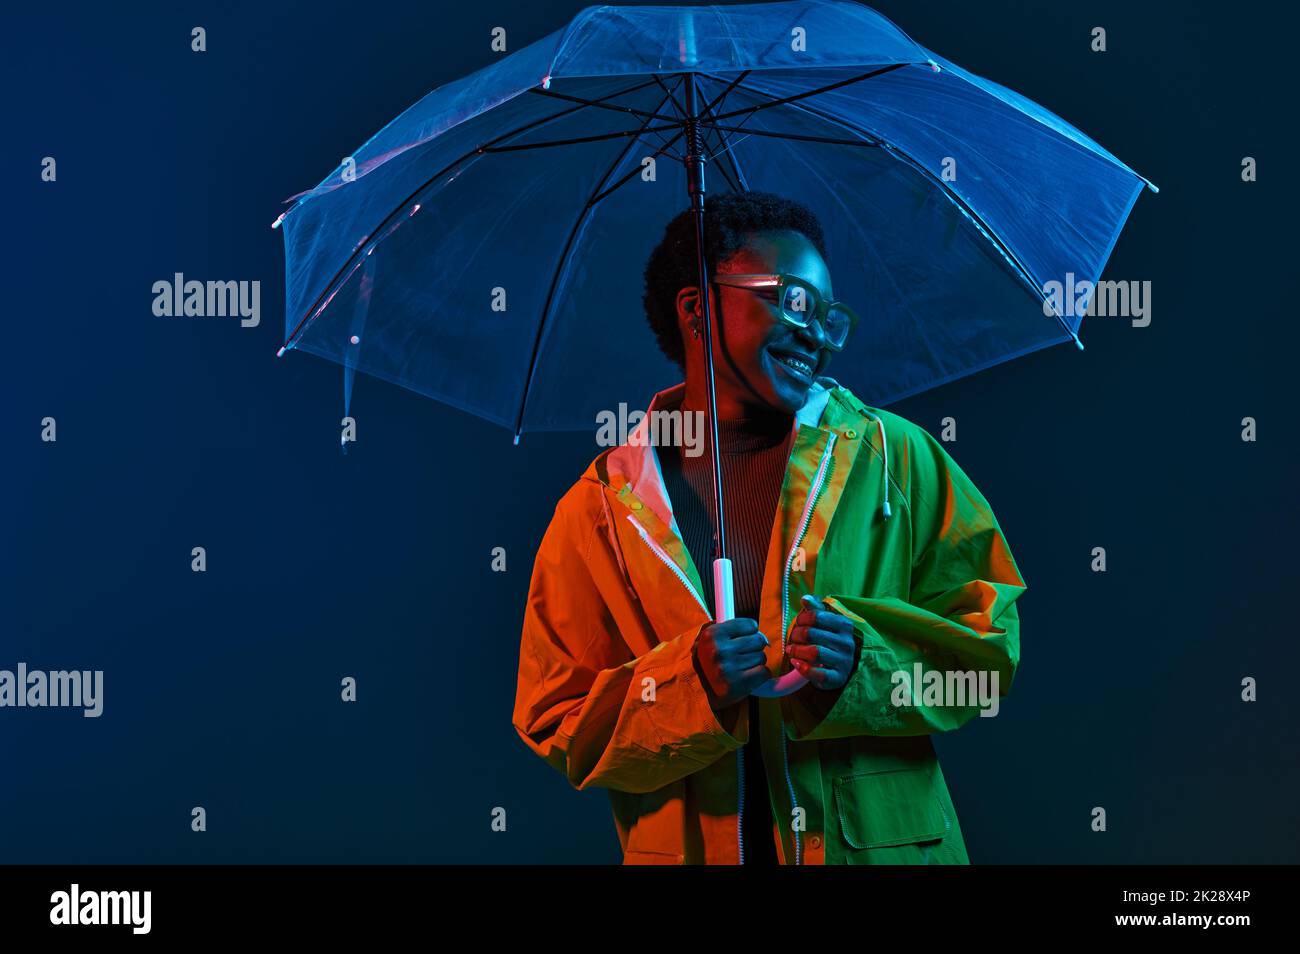 Hipster woman in raincoat with umbrella in neon light Stock Photo